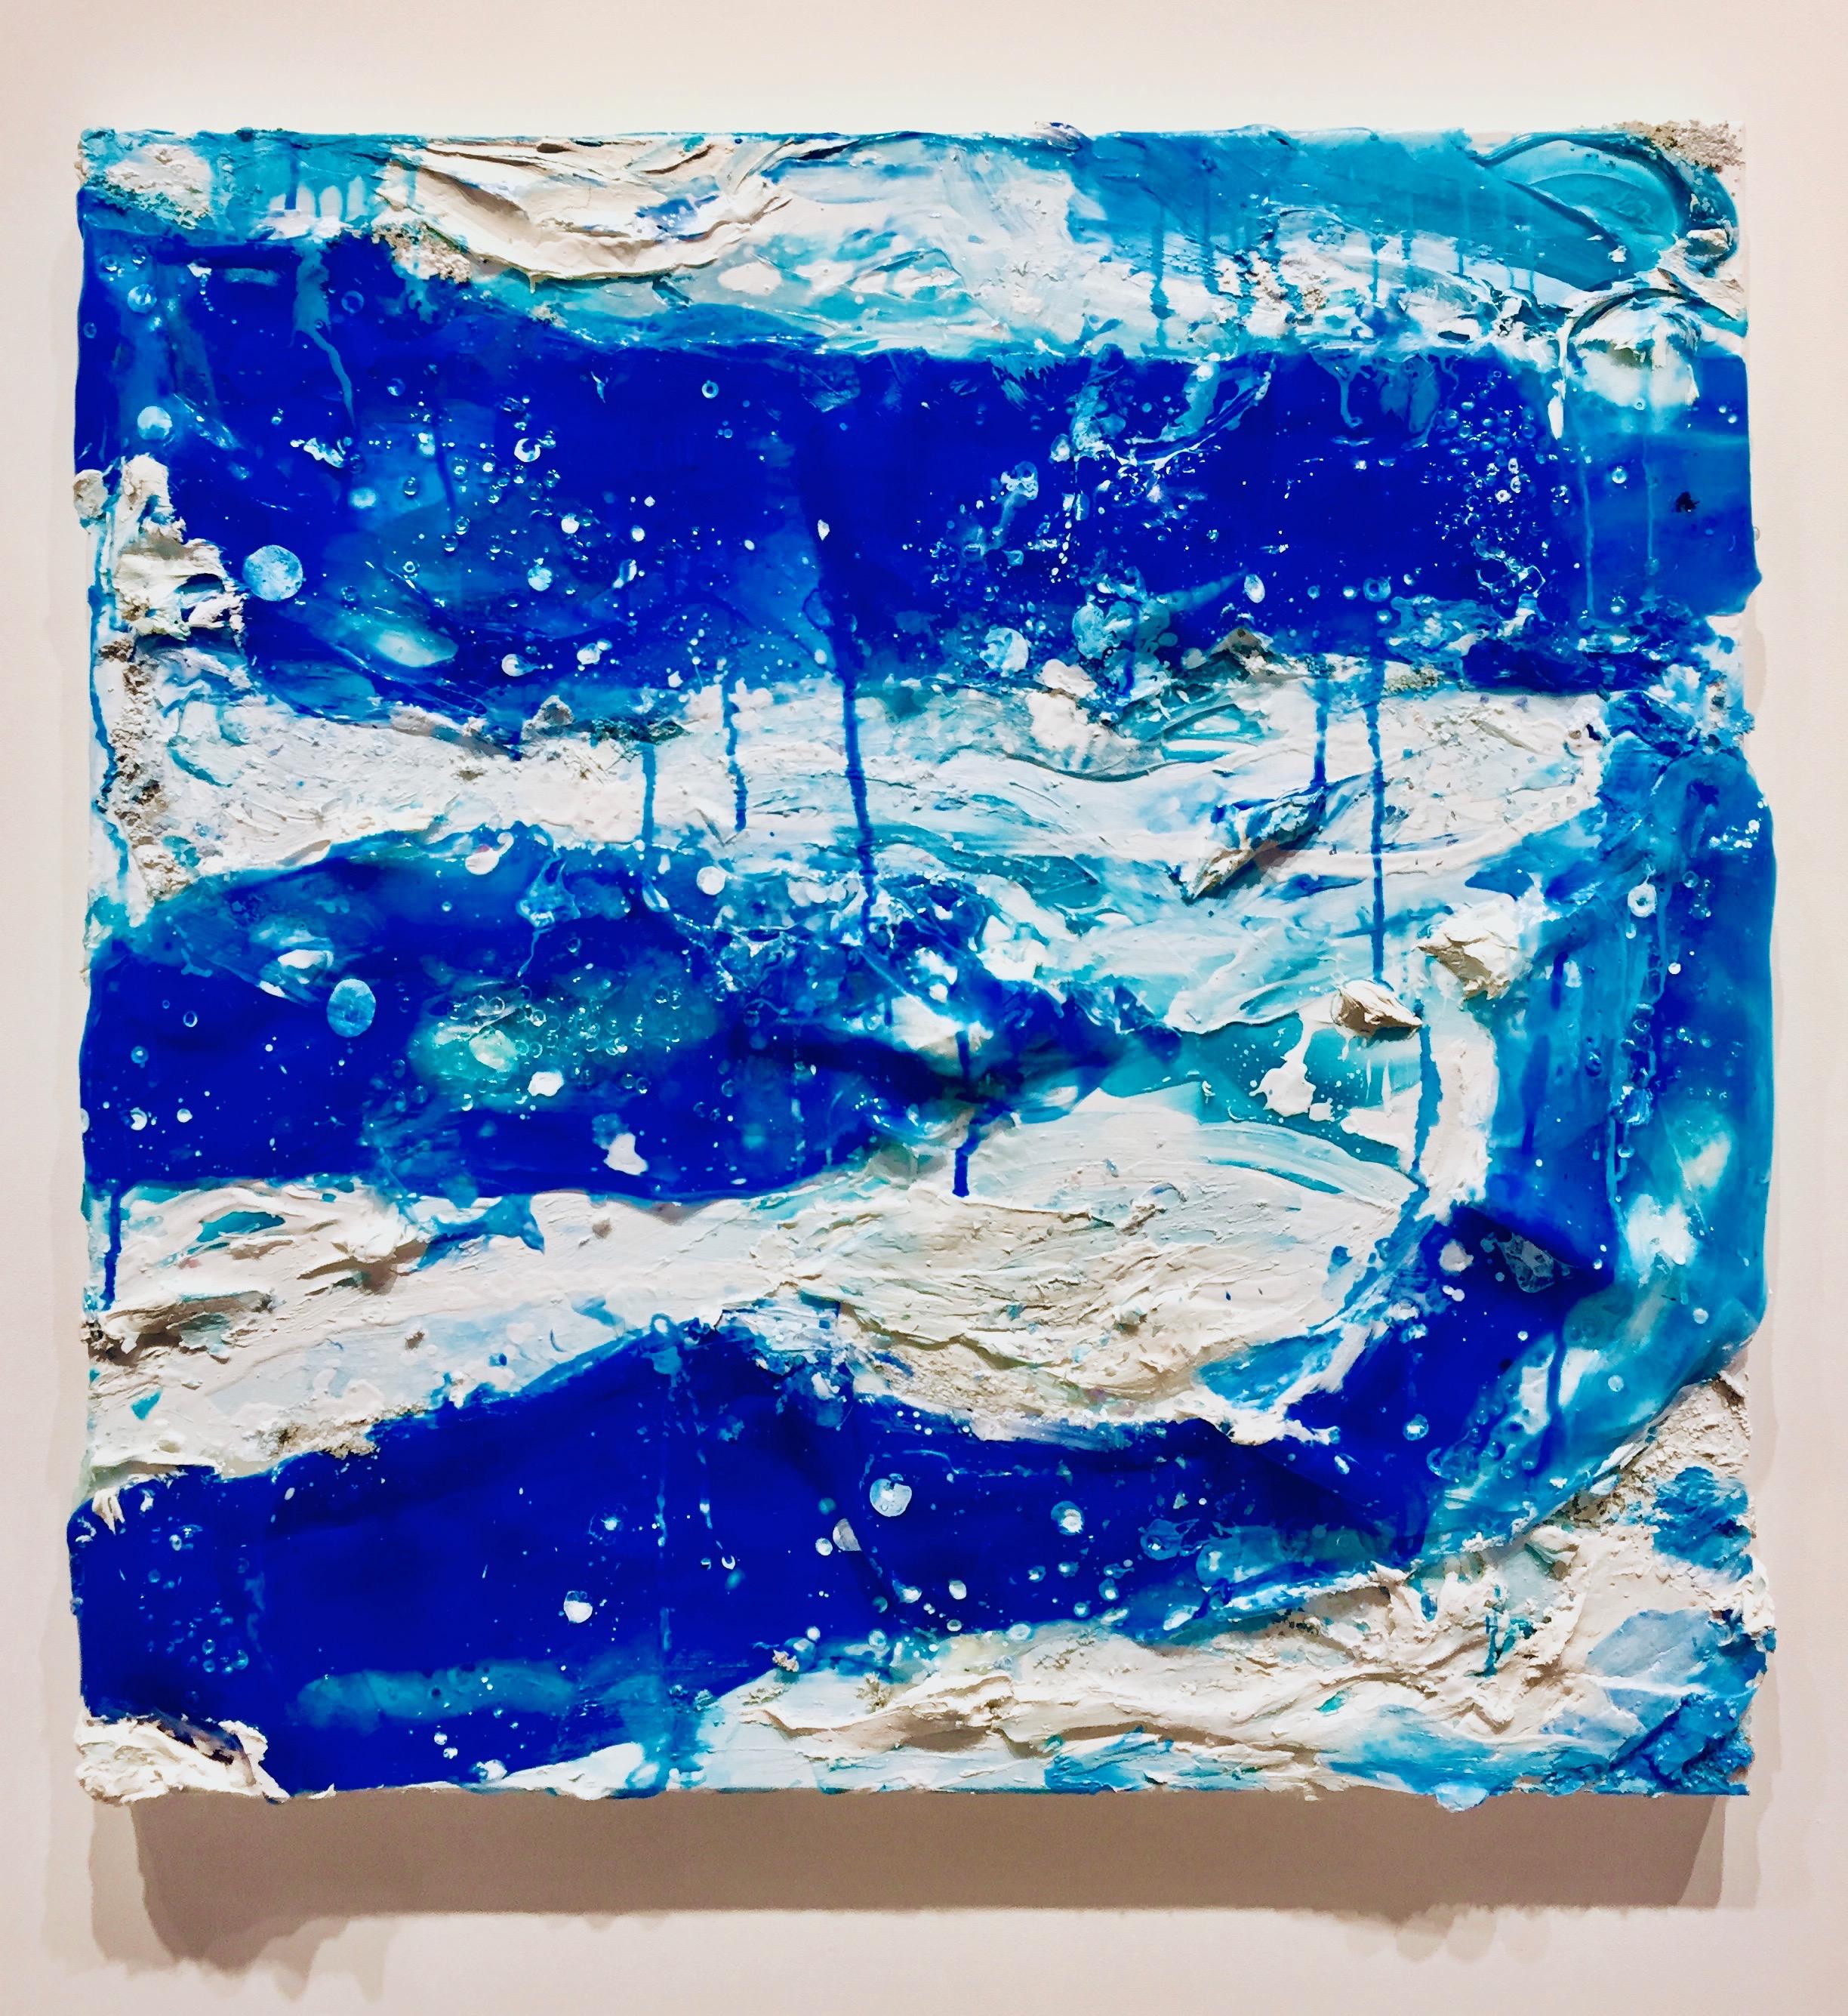 This painting is part of a series of 4 square paintings created in 2018, a laboratory for investigating the color blue, created by collaging with acrylic paint skins and other material that create texture. They were inspired by the ocean.